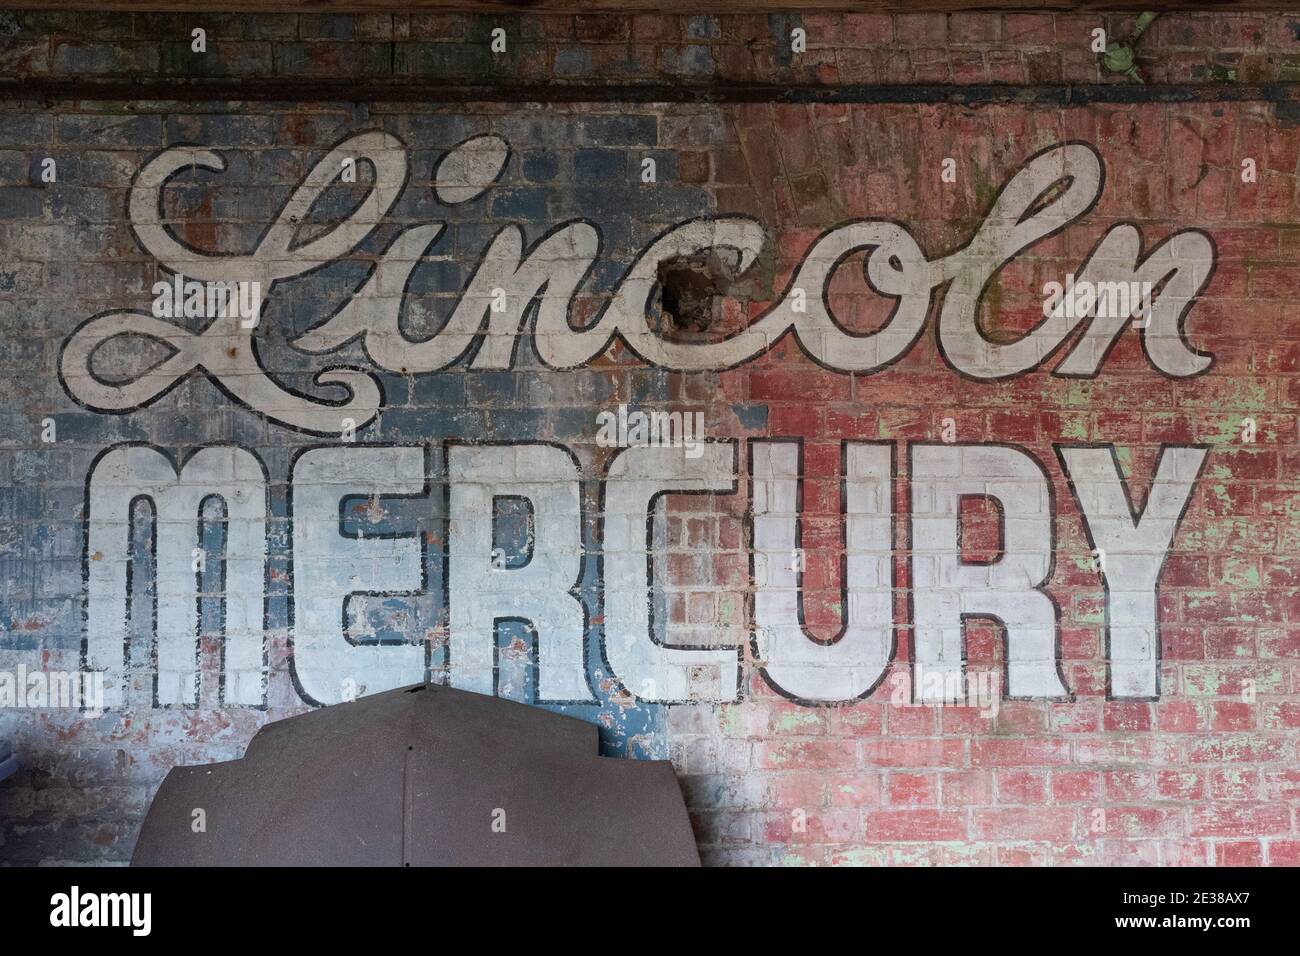 Lincoln Mercury painted sign, American automobile or car manufacturer Stock Photo